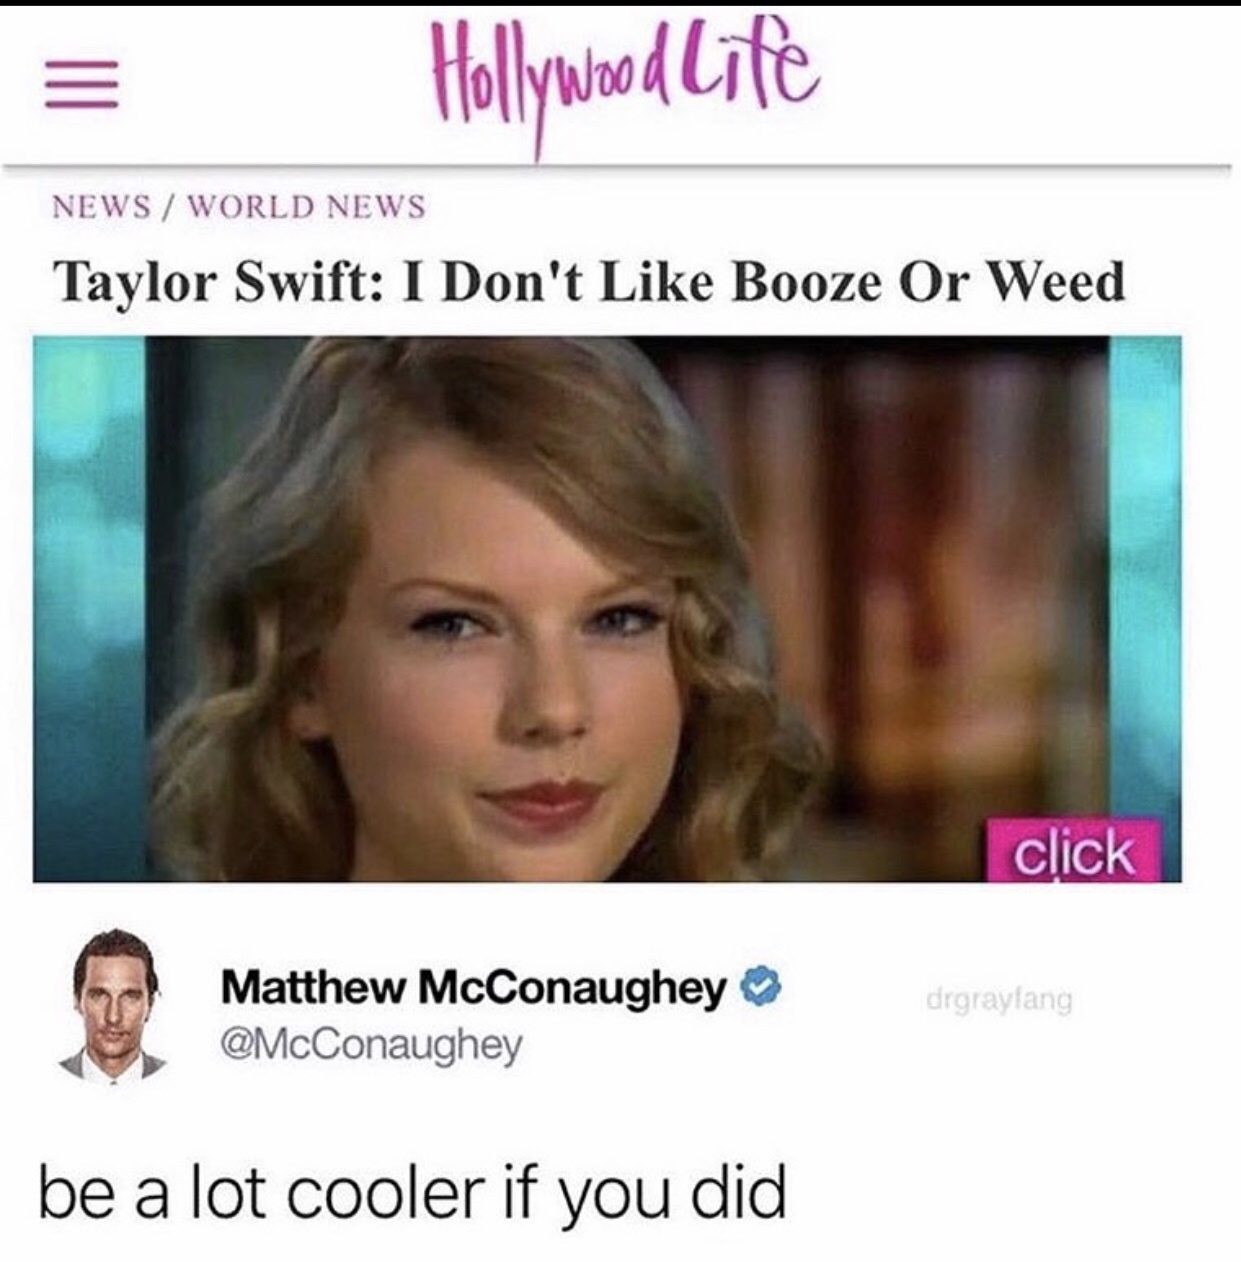 hollywood life - Hollywood life News World News Taylor Swift I Don't Booze Or Weed click Matthew McConaughey drgraylang be a lot cooler if you did